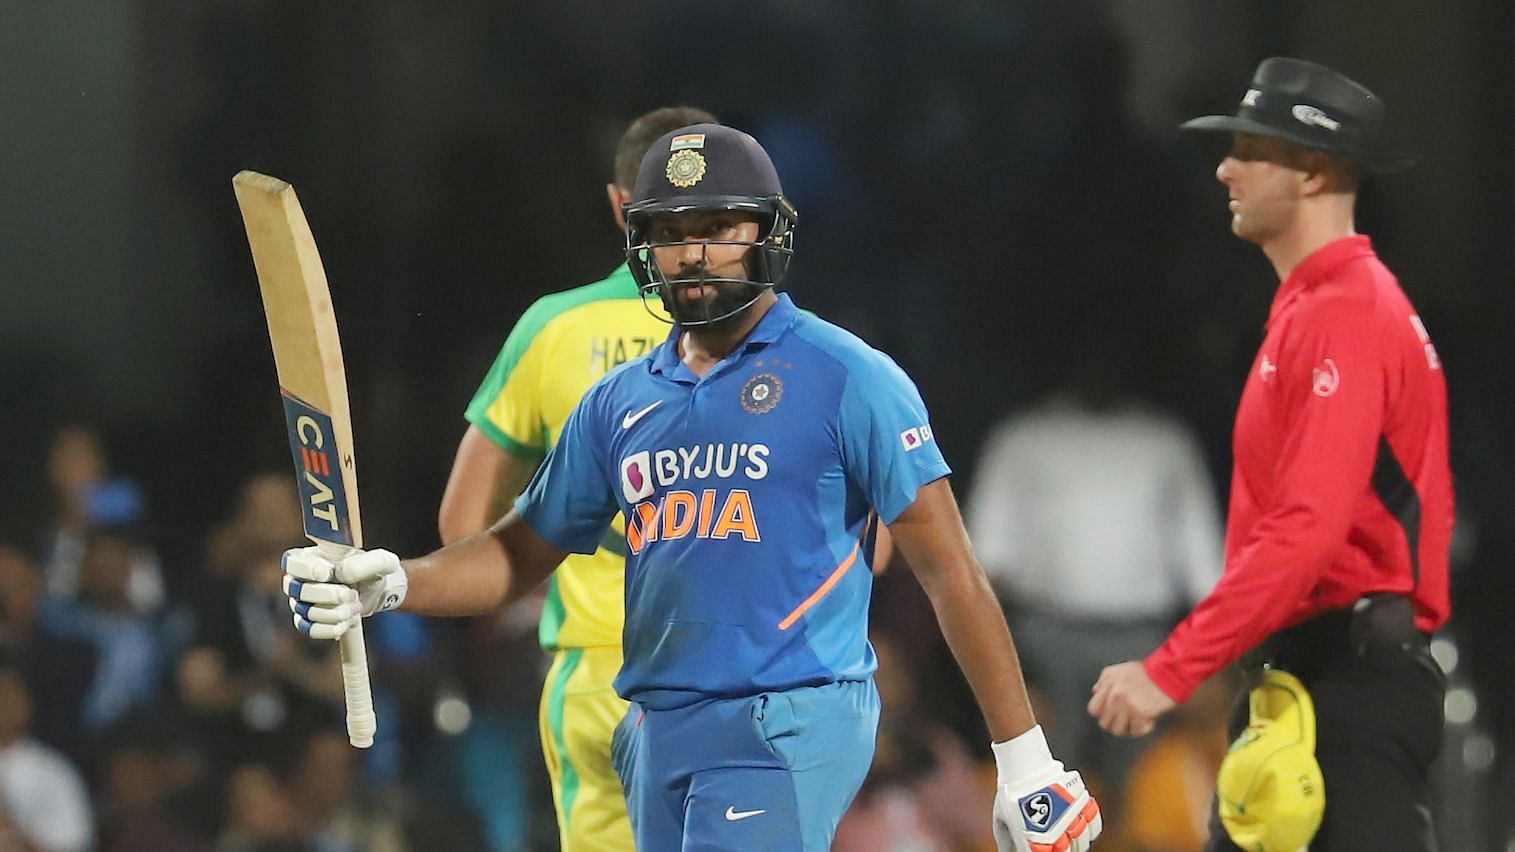 Rohit Sharma scored 119 off 128 balls as India beat Australia by seven wickets in the 3rd ODI to win the series 2-1.